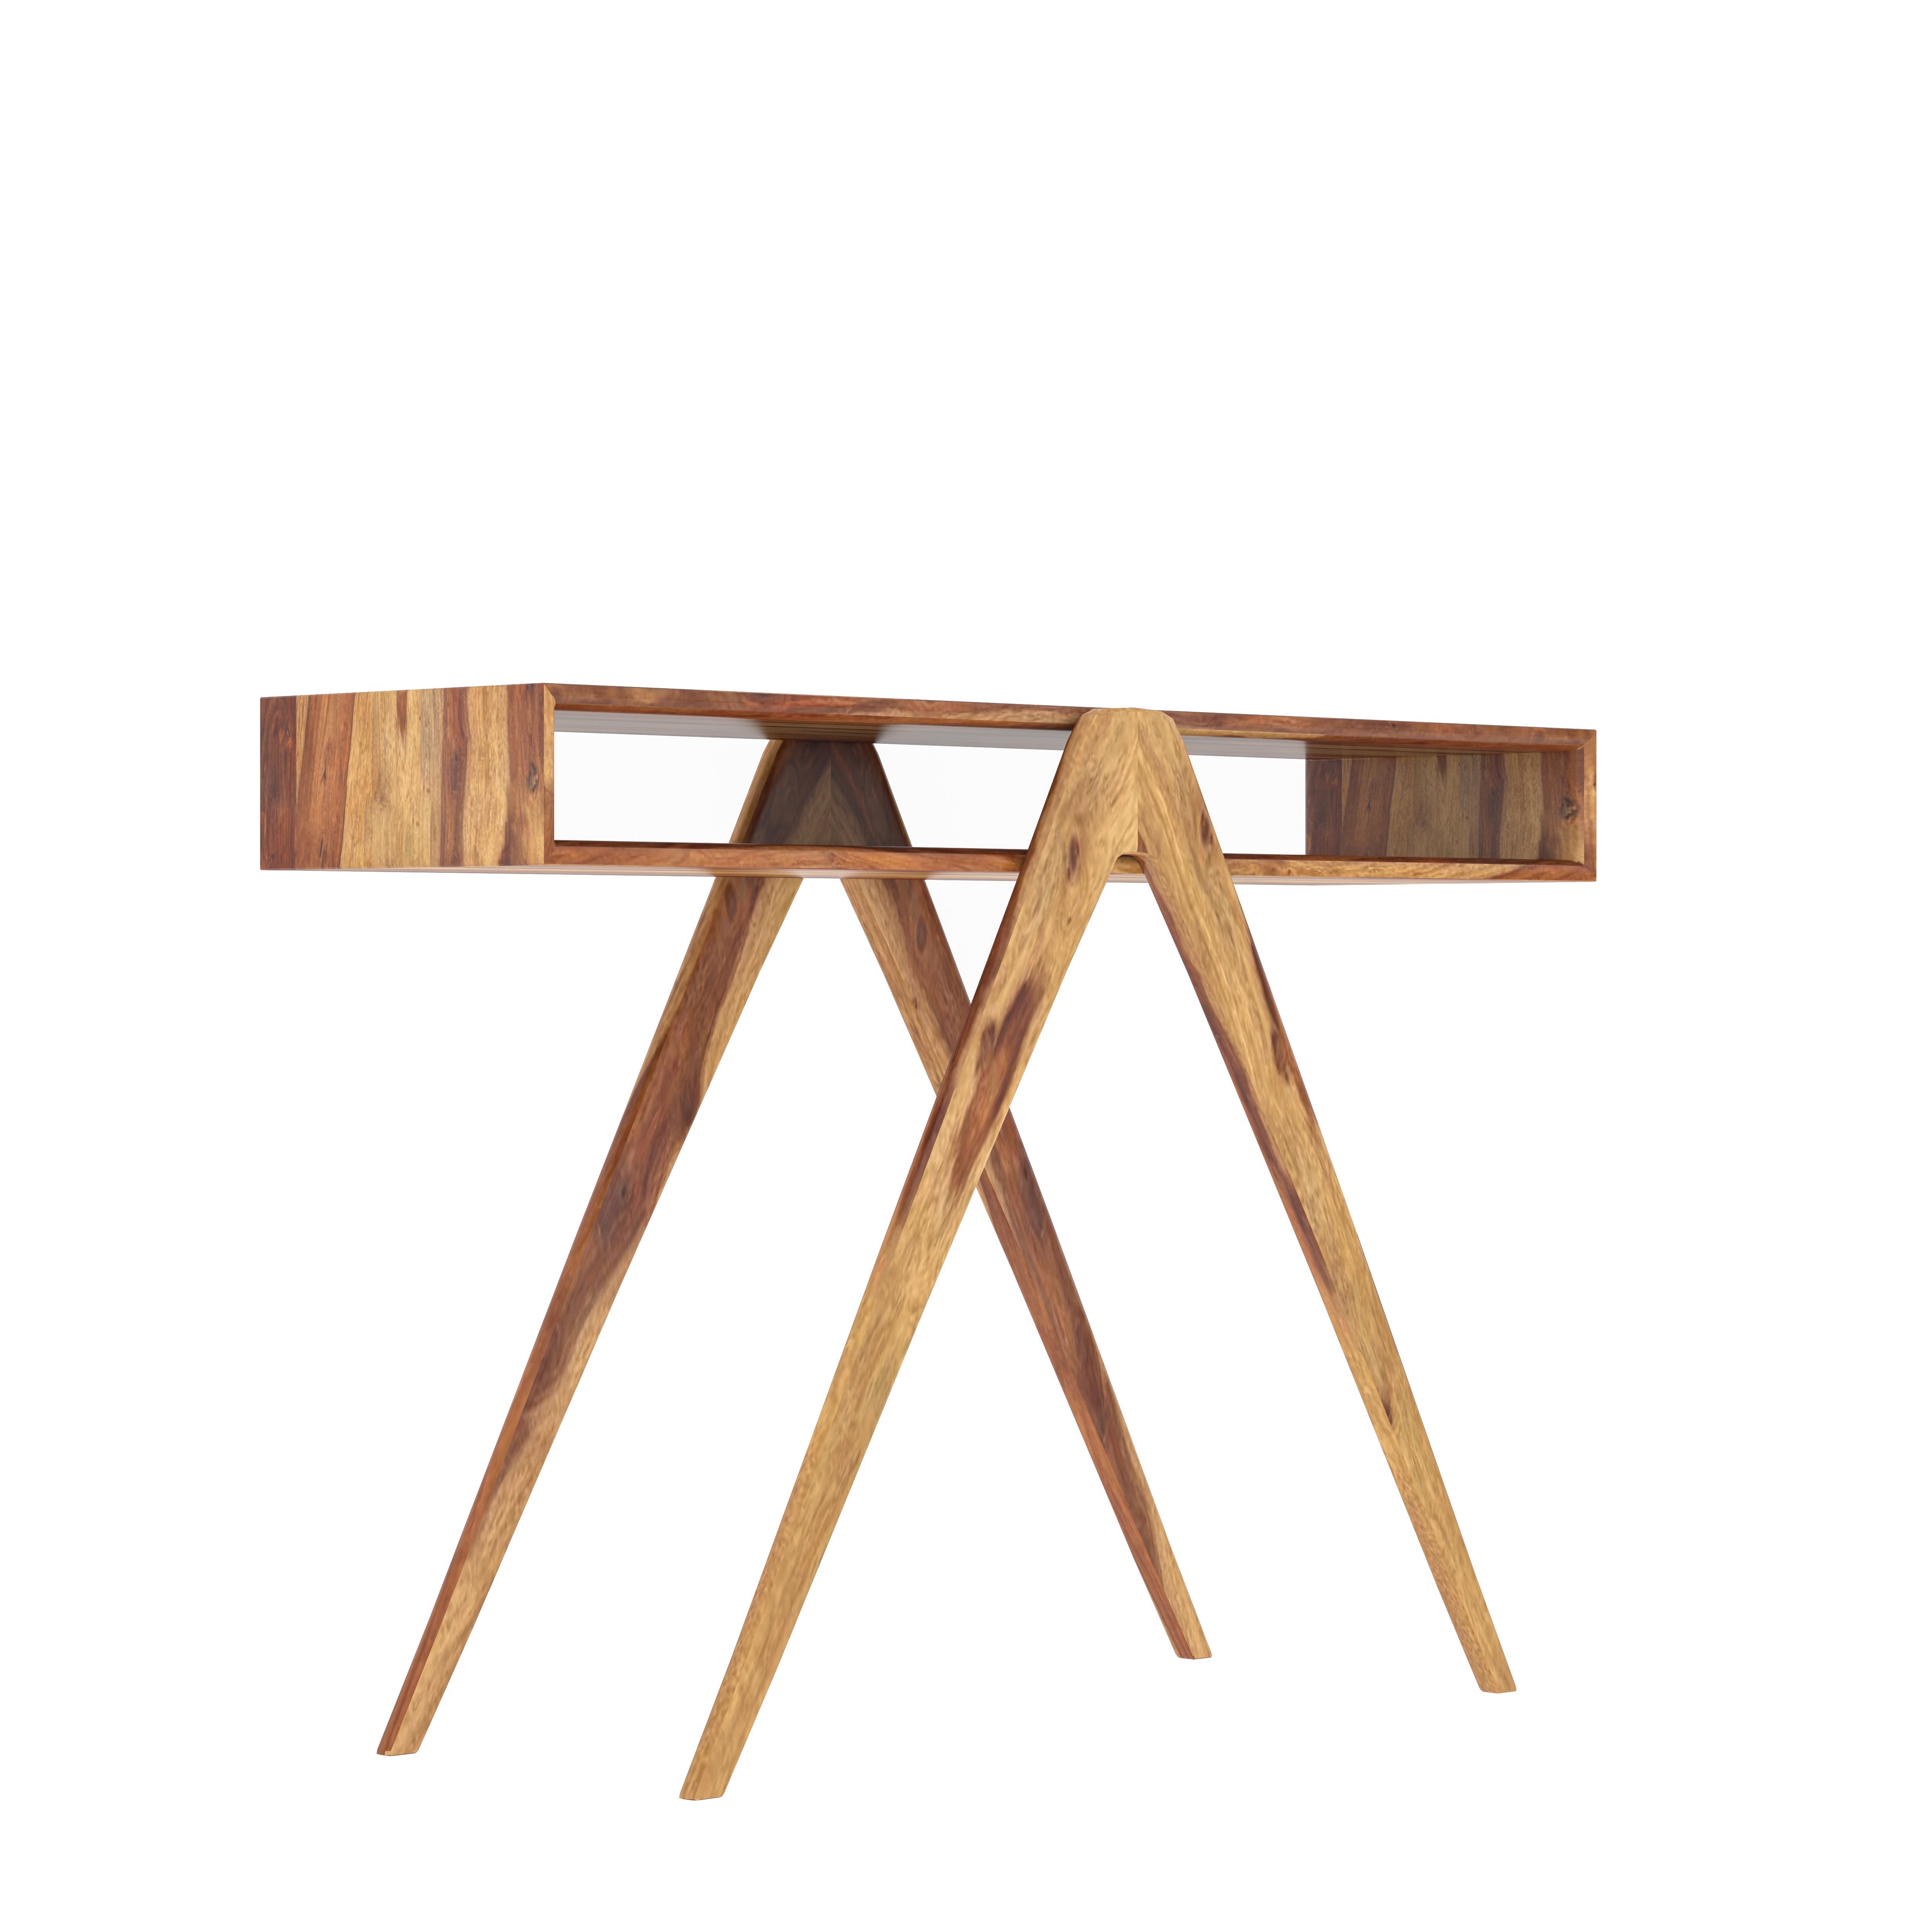 Croma Cross Legs Designed Wooden Handmade Console Table Console Table